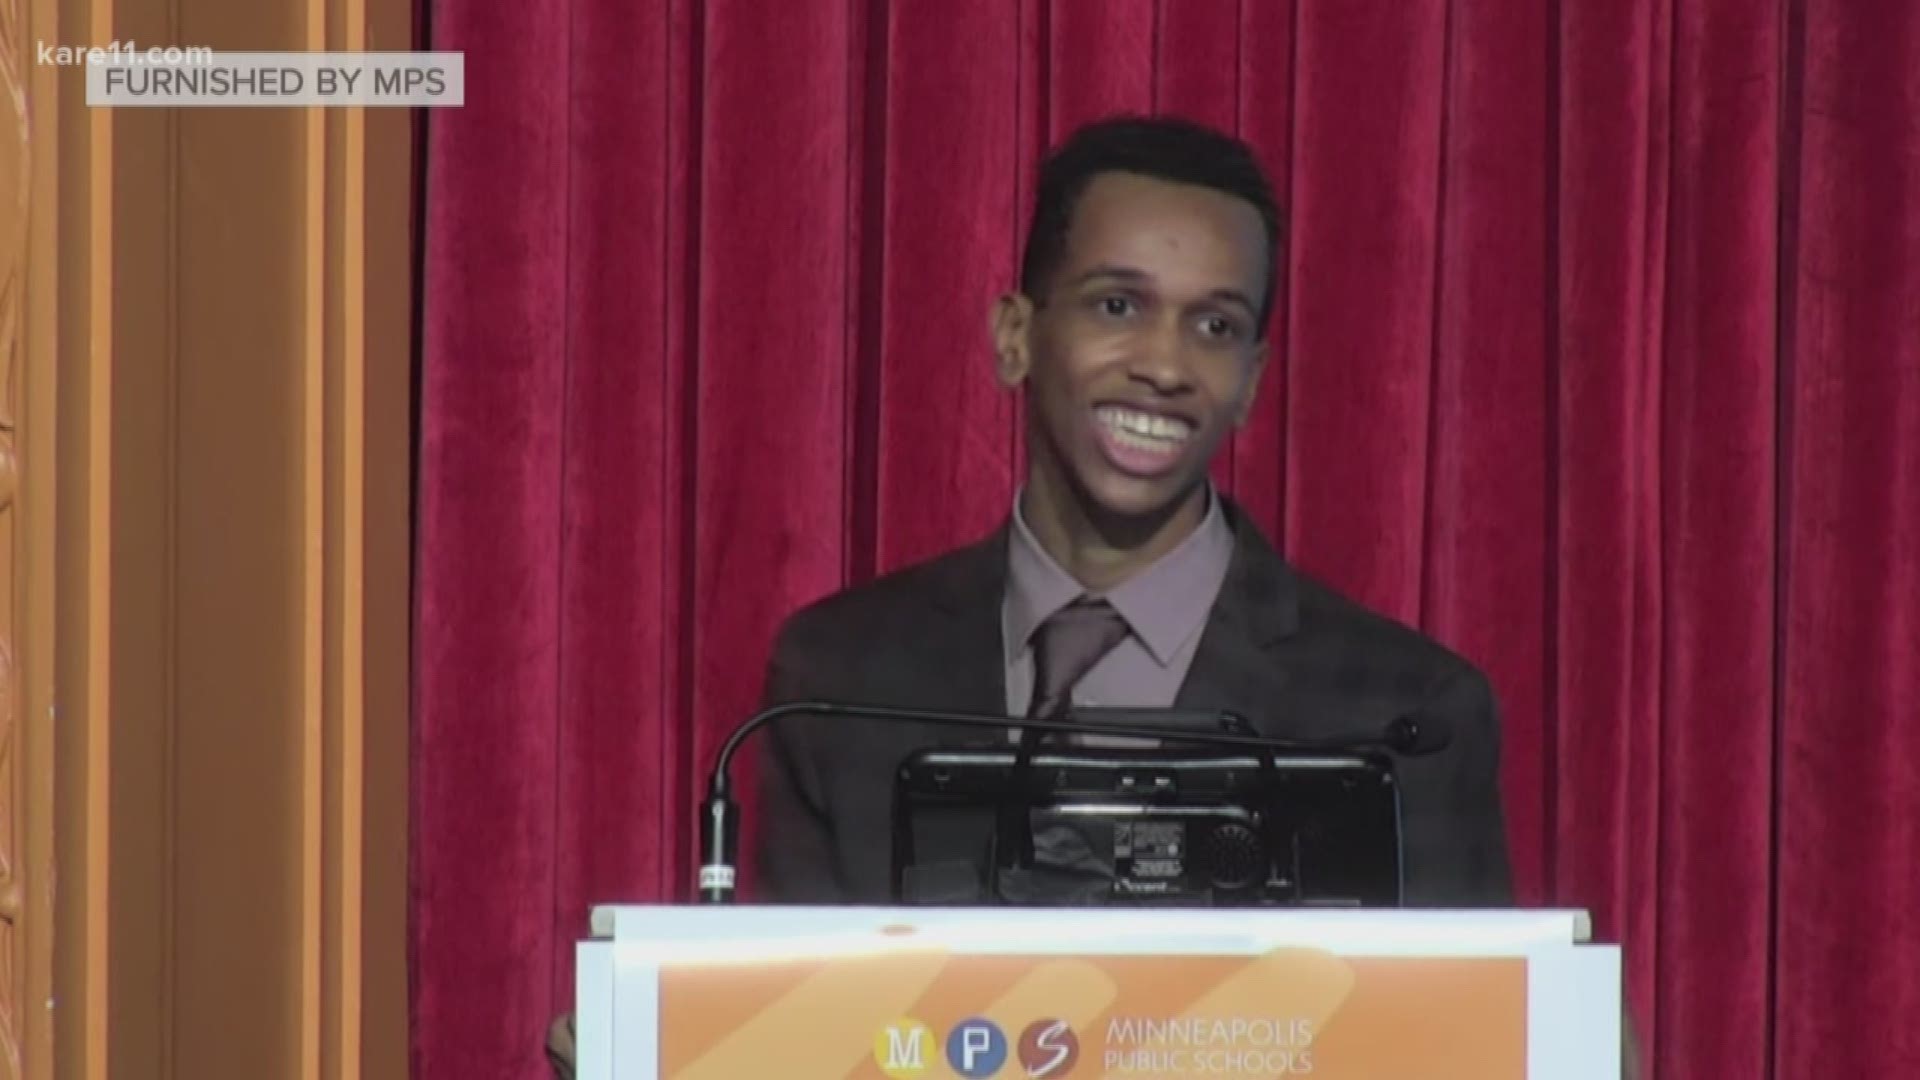 Ahmed Ali's viral speech was so inspirational that Minneapolis Public Schools invited him back to open the school year.